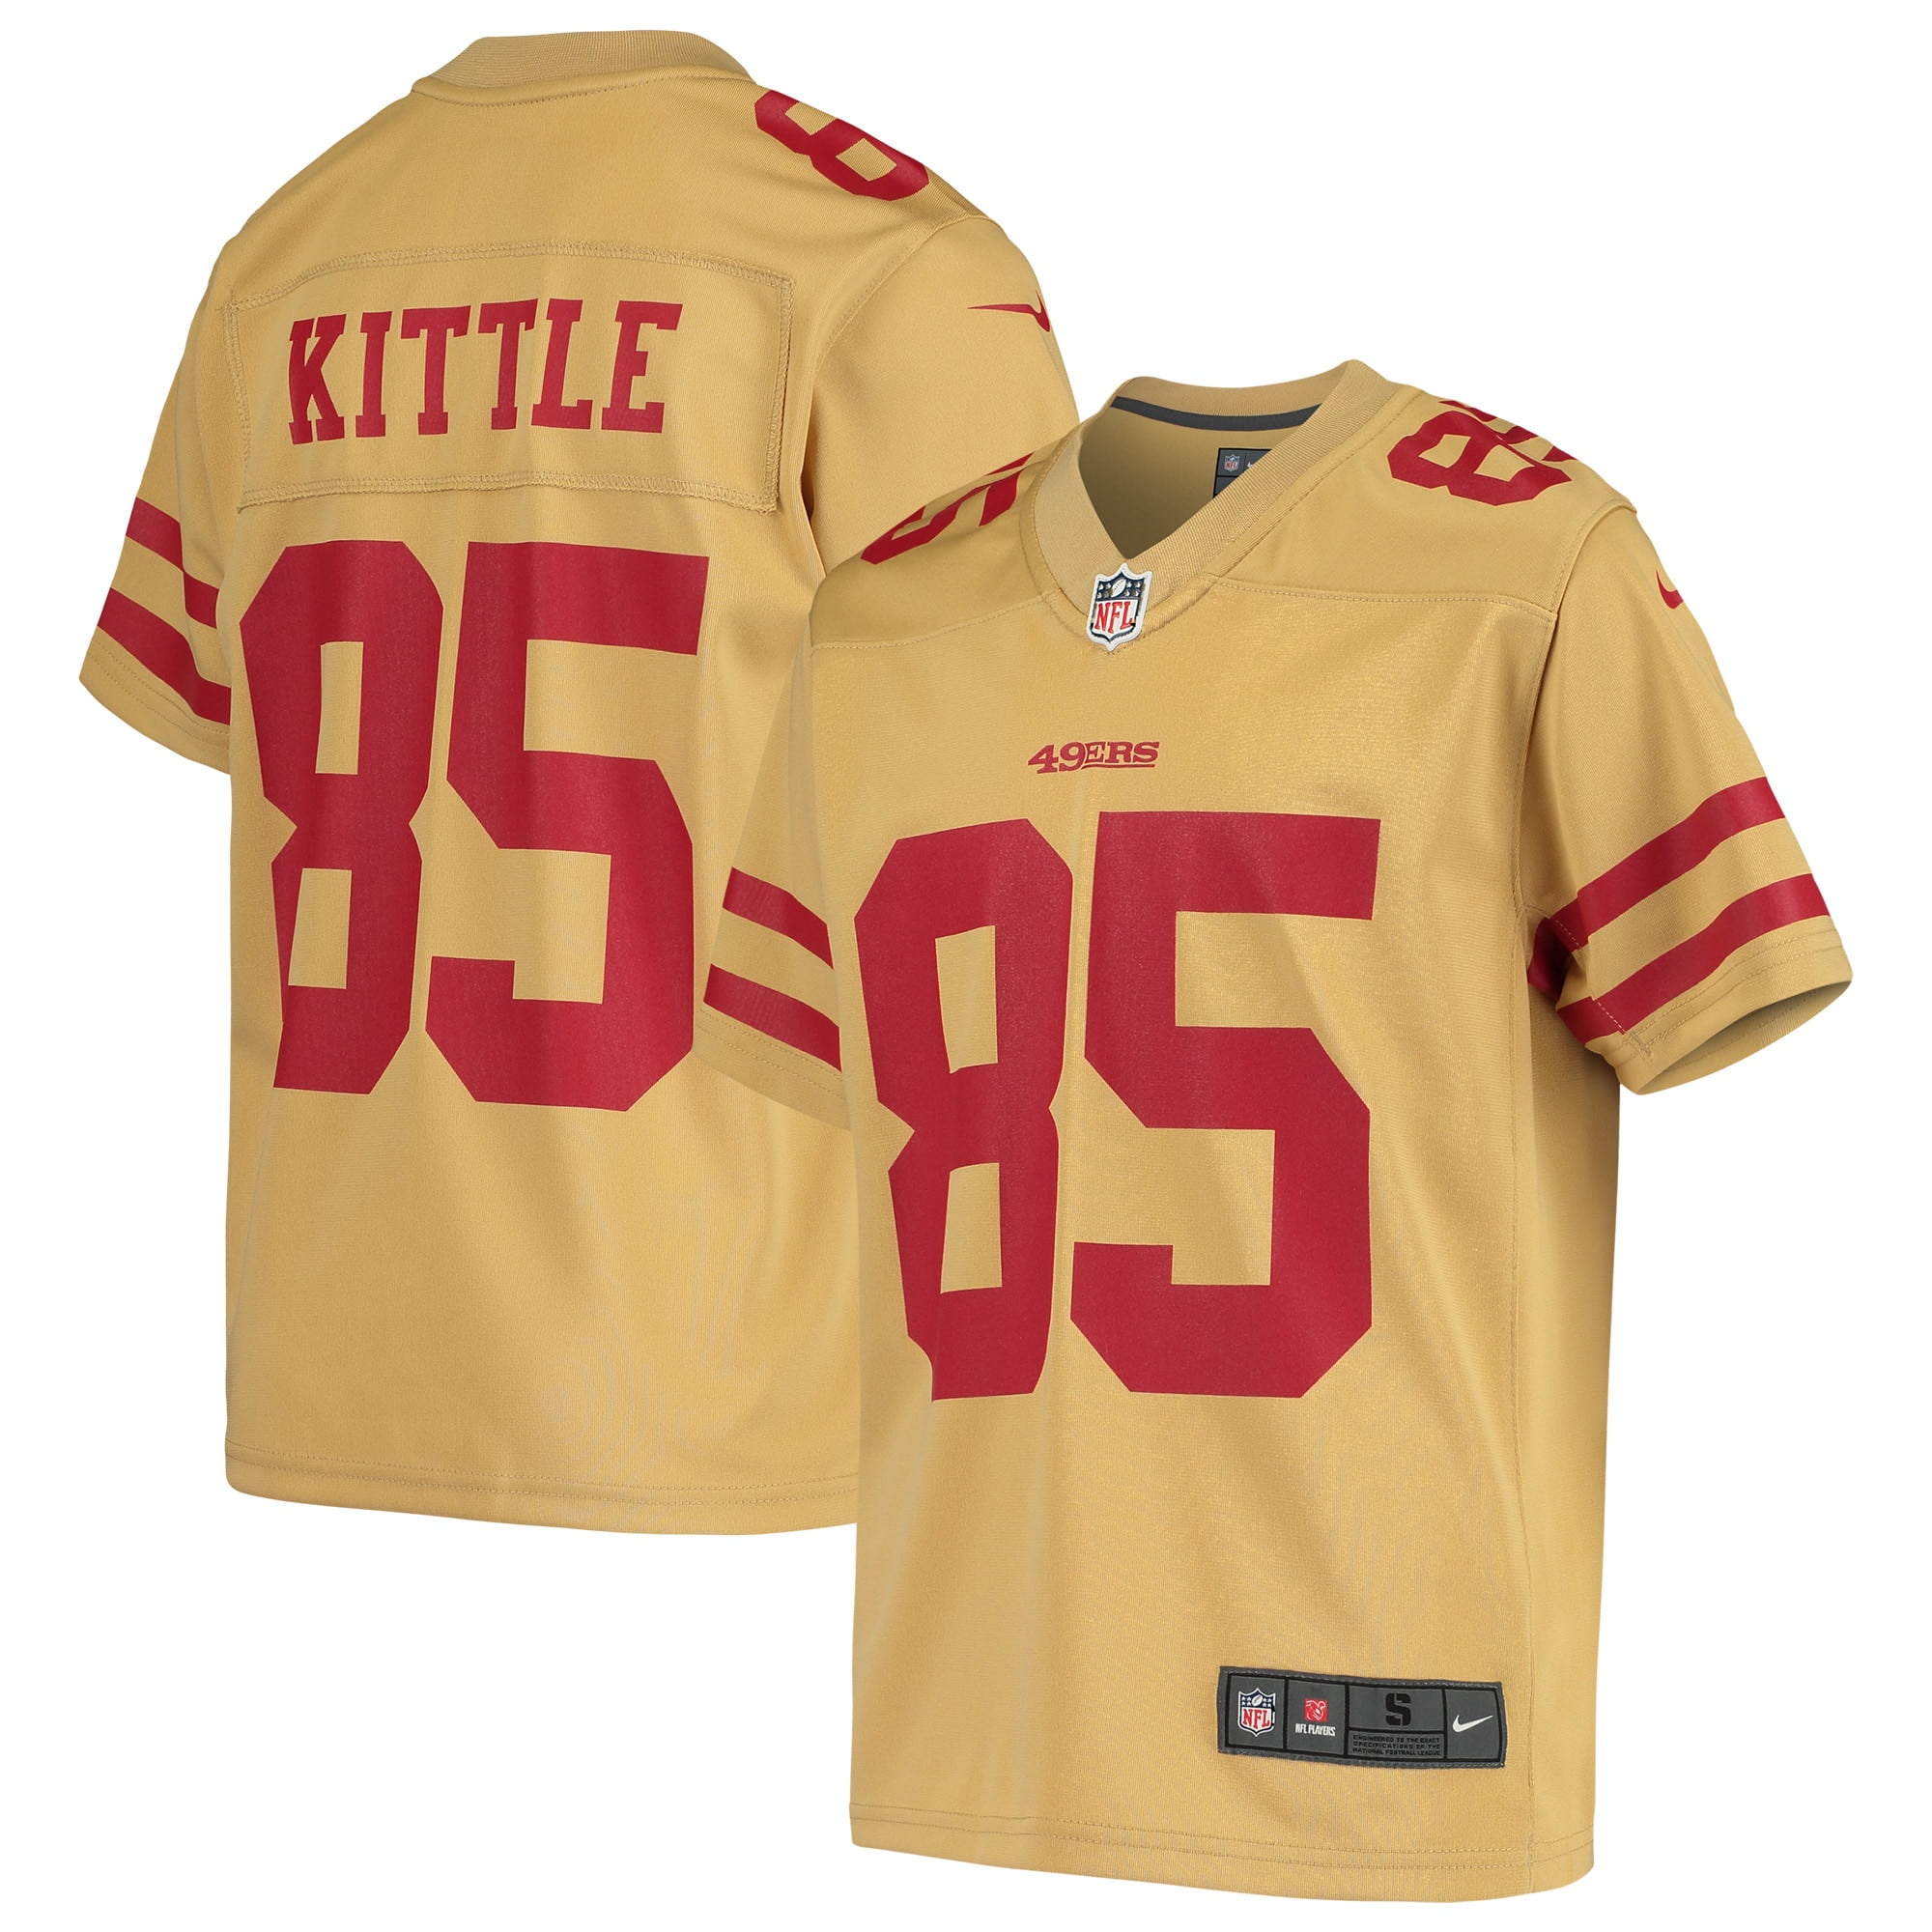 49ers gold and red jersey